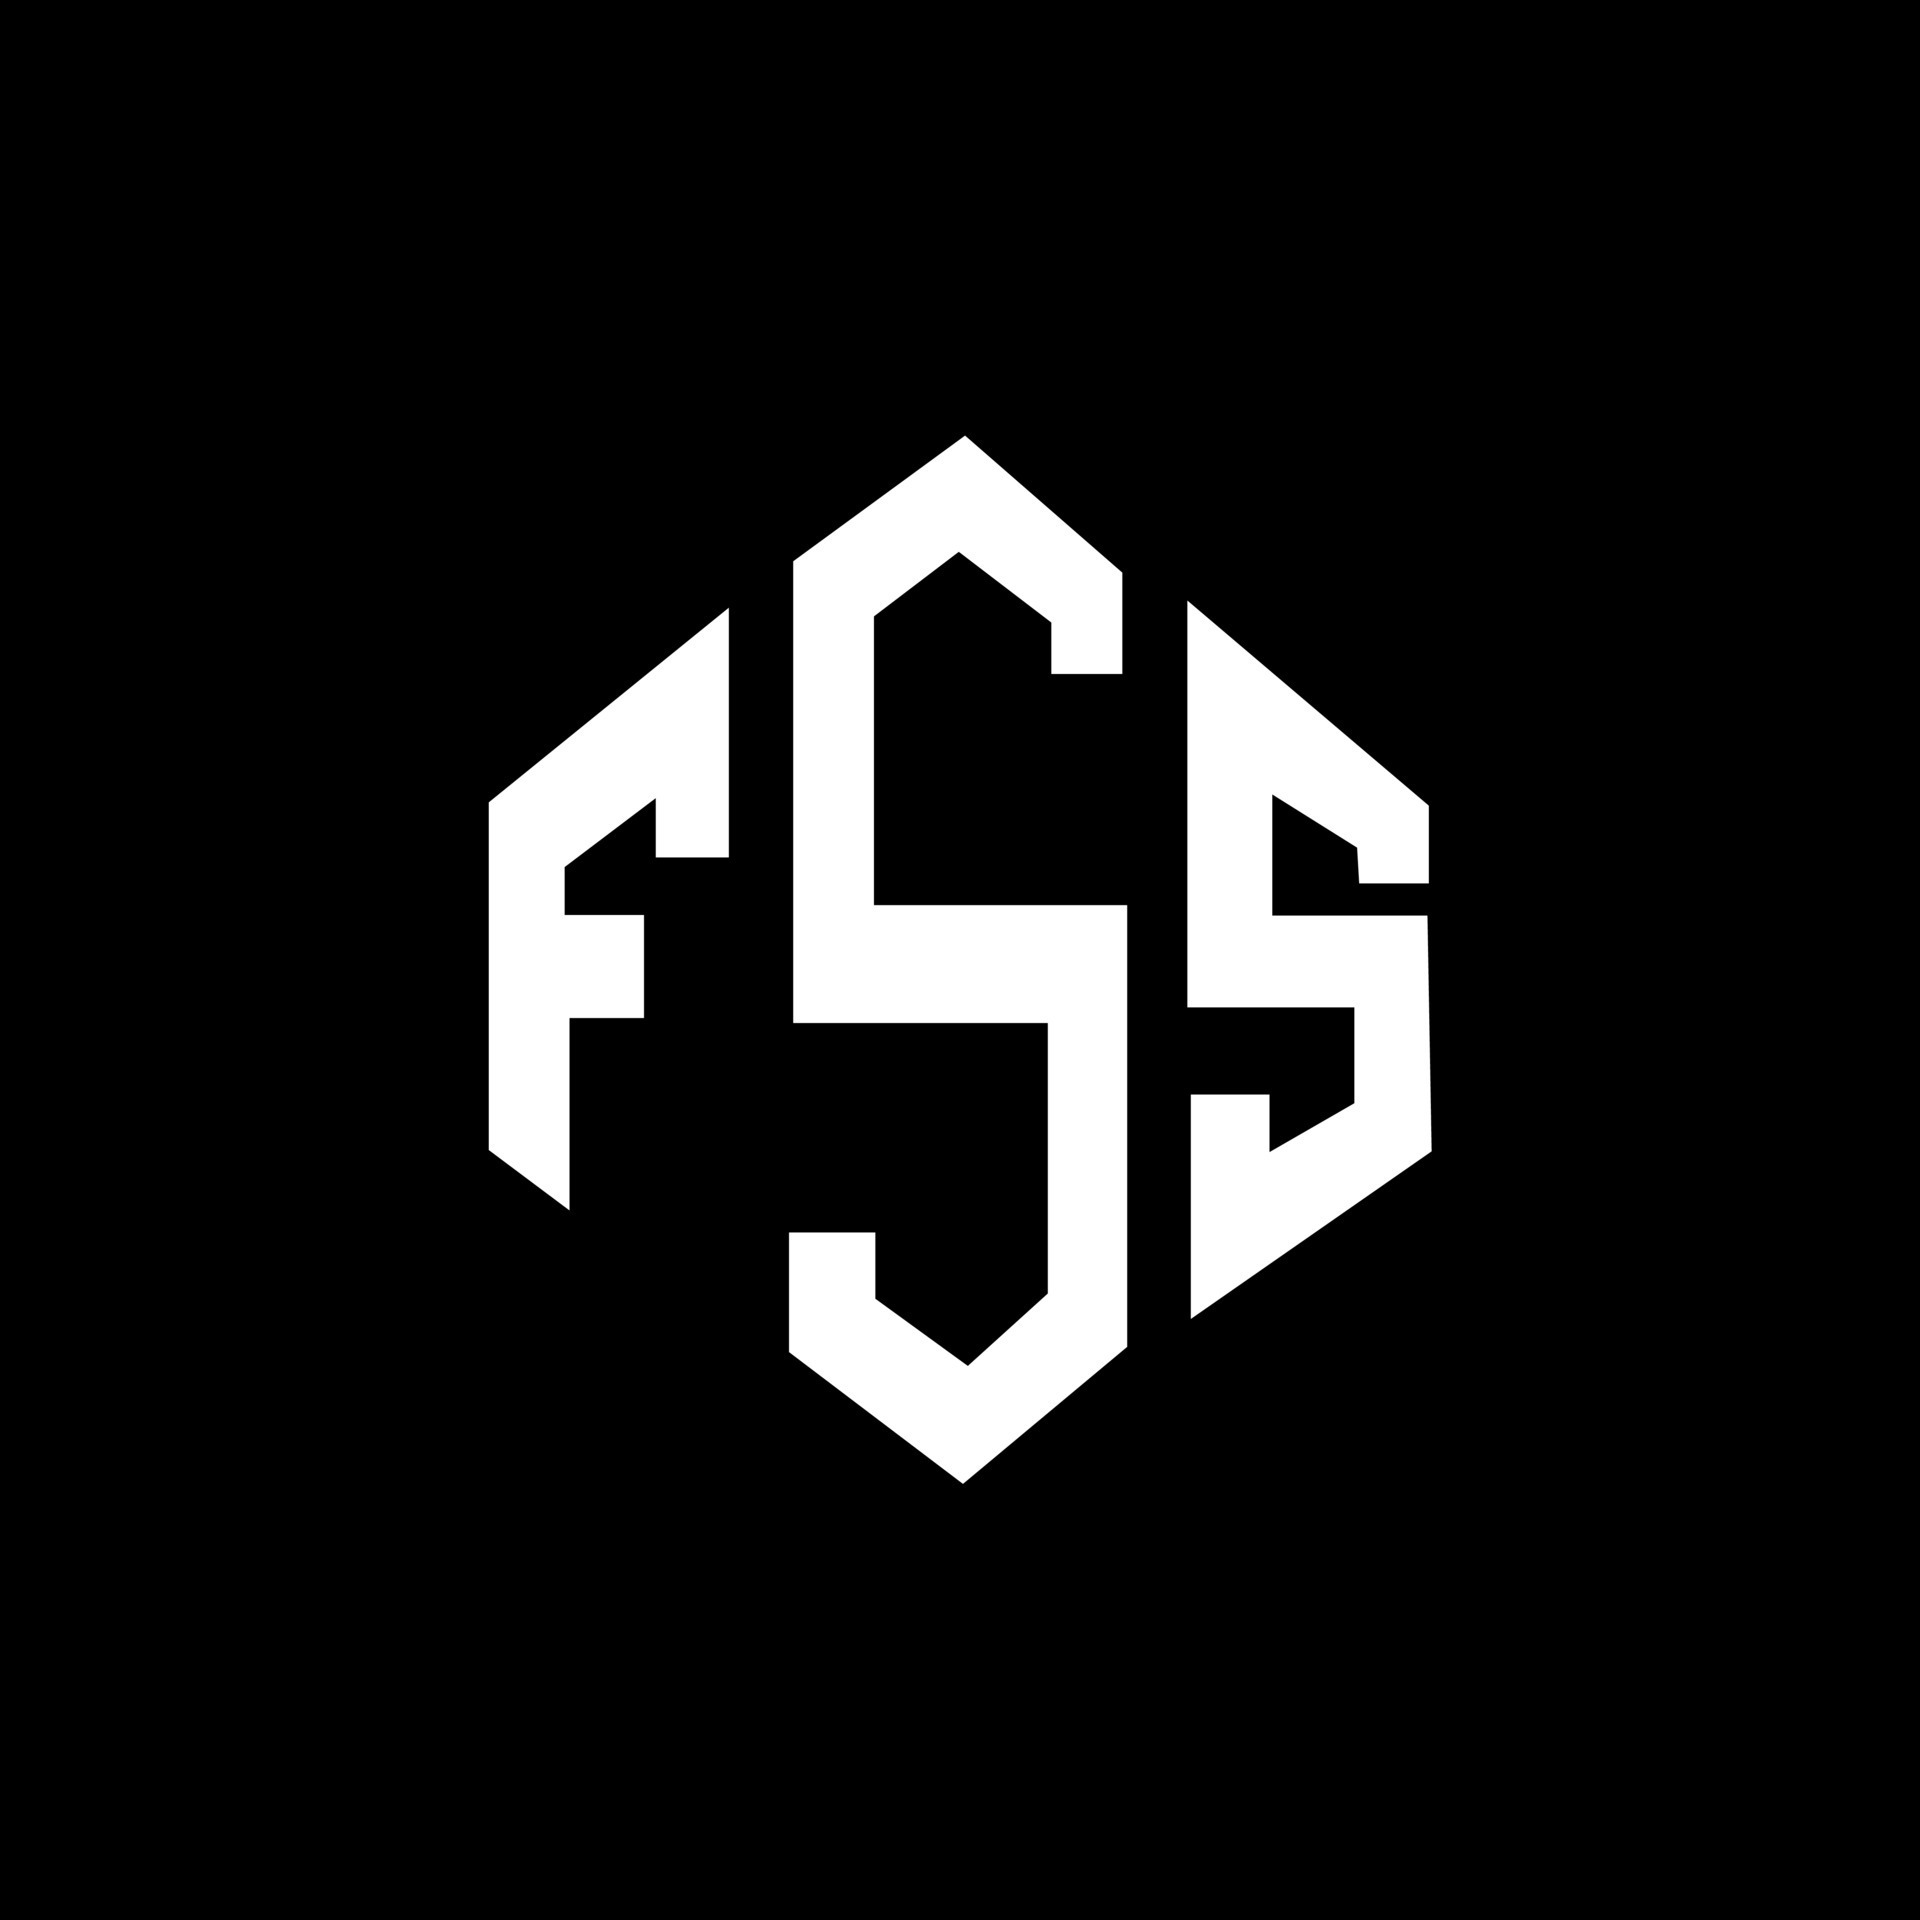 FSS letter logo design with polygon shape. FSS polygon and cube shape ...